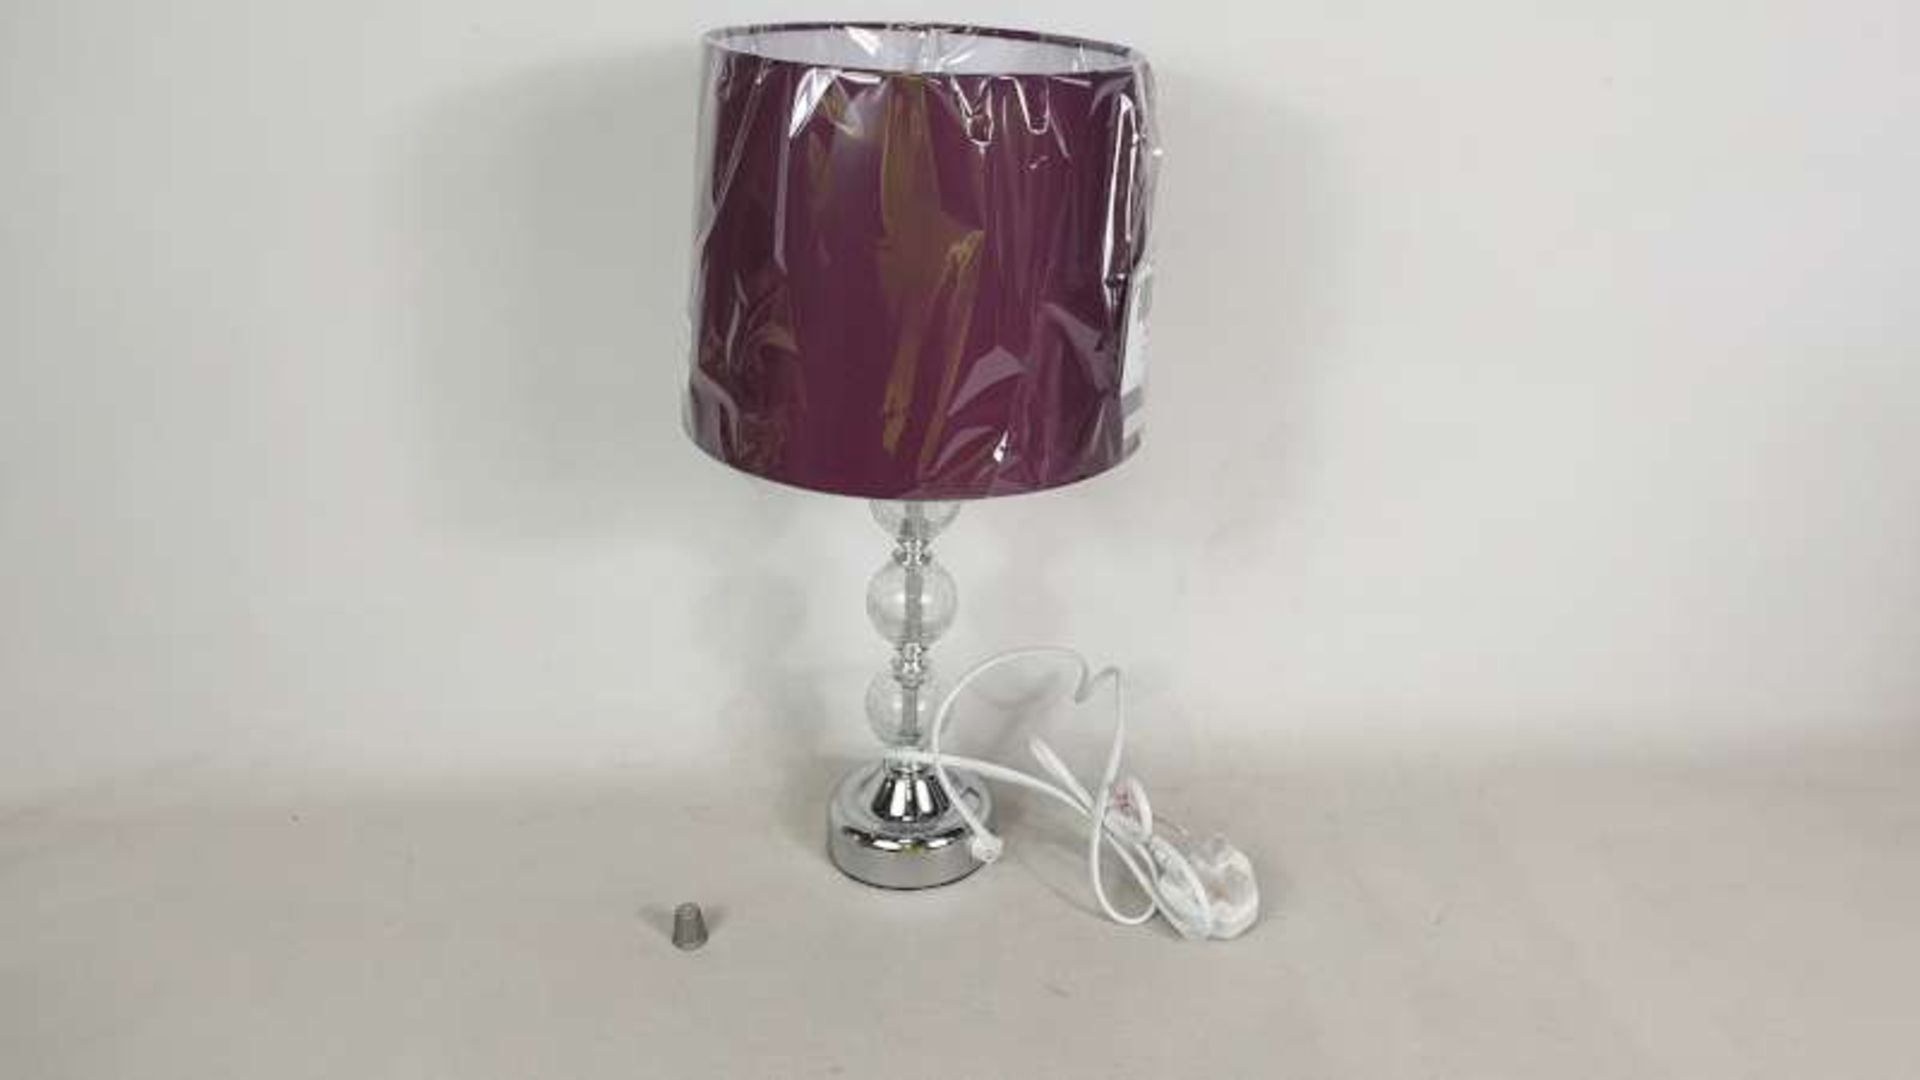 12 X BRAND NEW BOXED CRACKLE GLASS BALL TOUCH TABLE LAMP WITH PURPLE COLOURED SHADE IN 2 BOXES